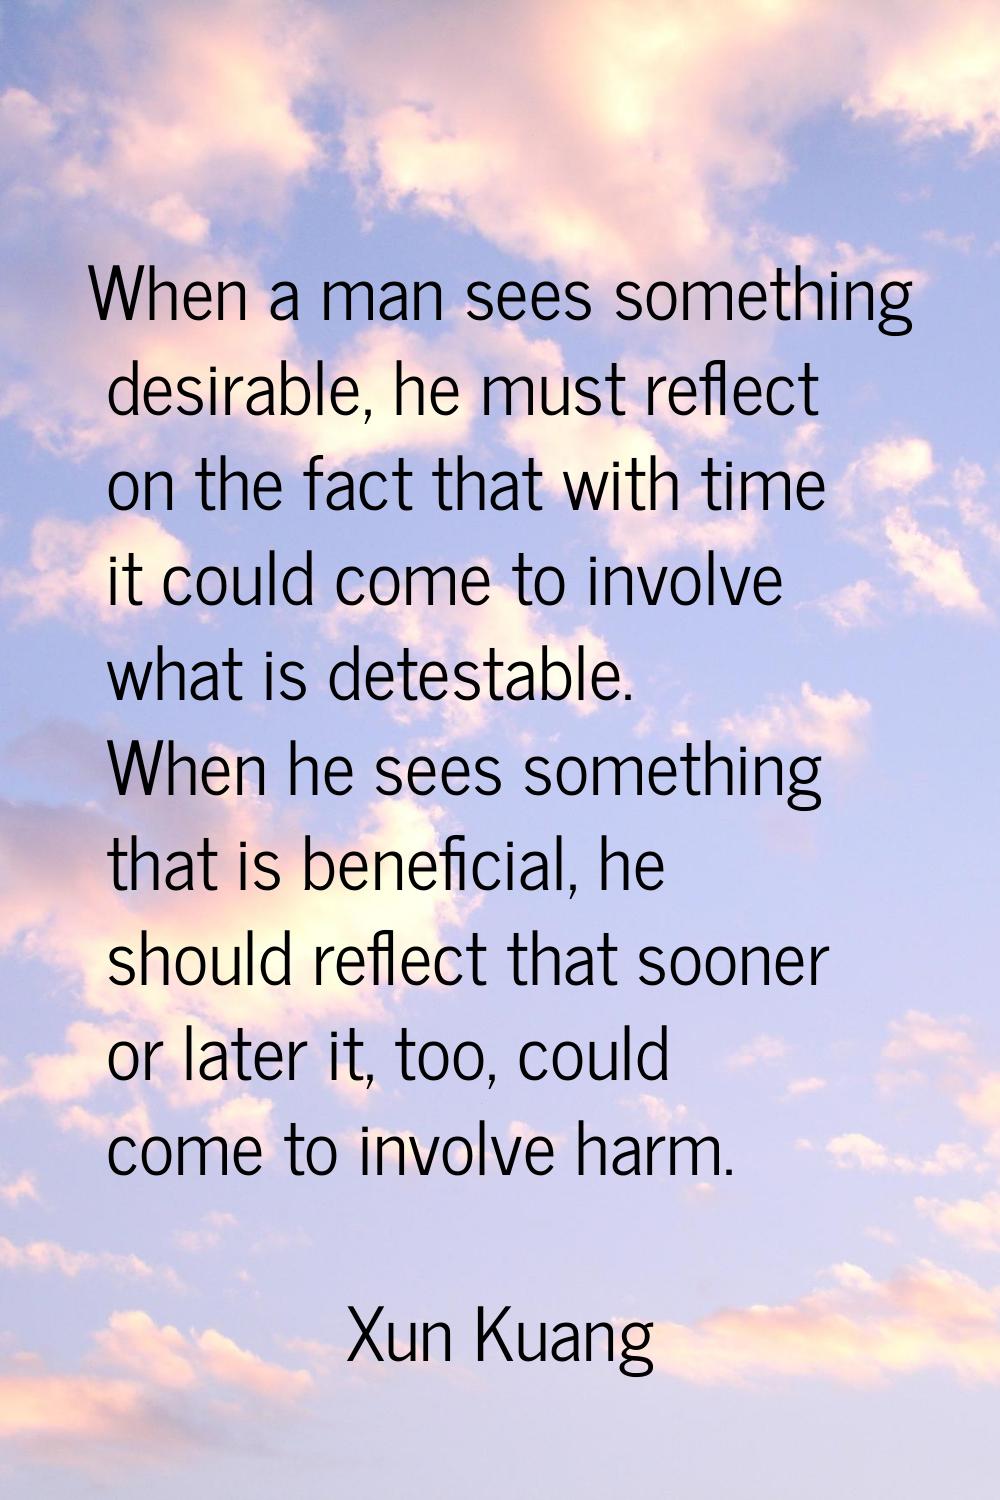 When a man sees something desirable, he must reflect on the fact that with time it could come to in